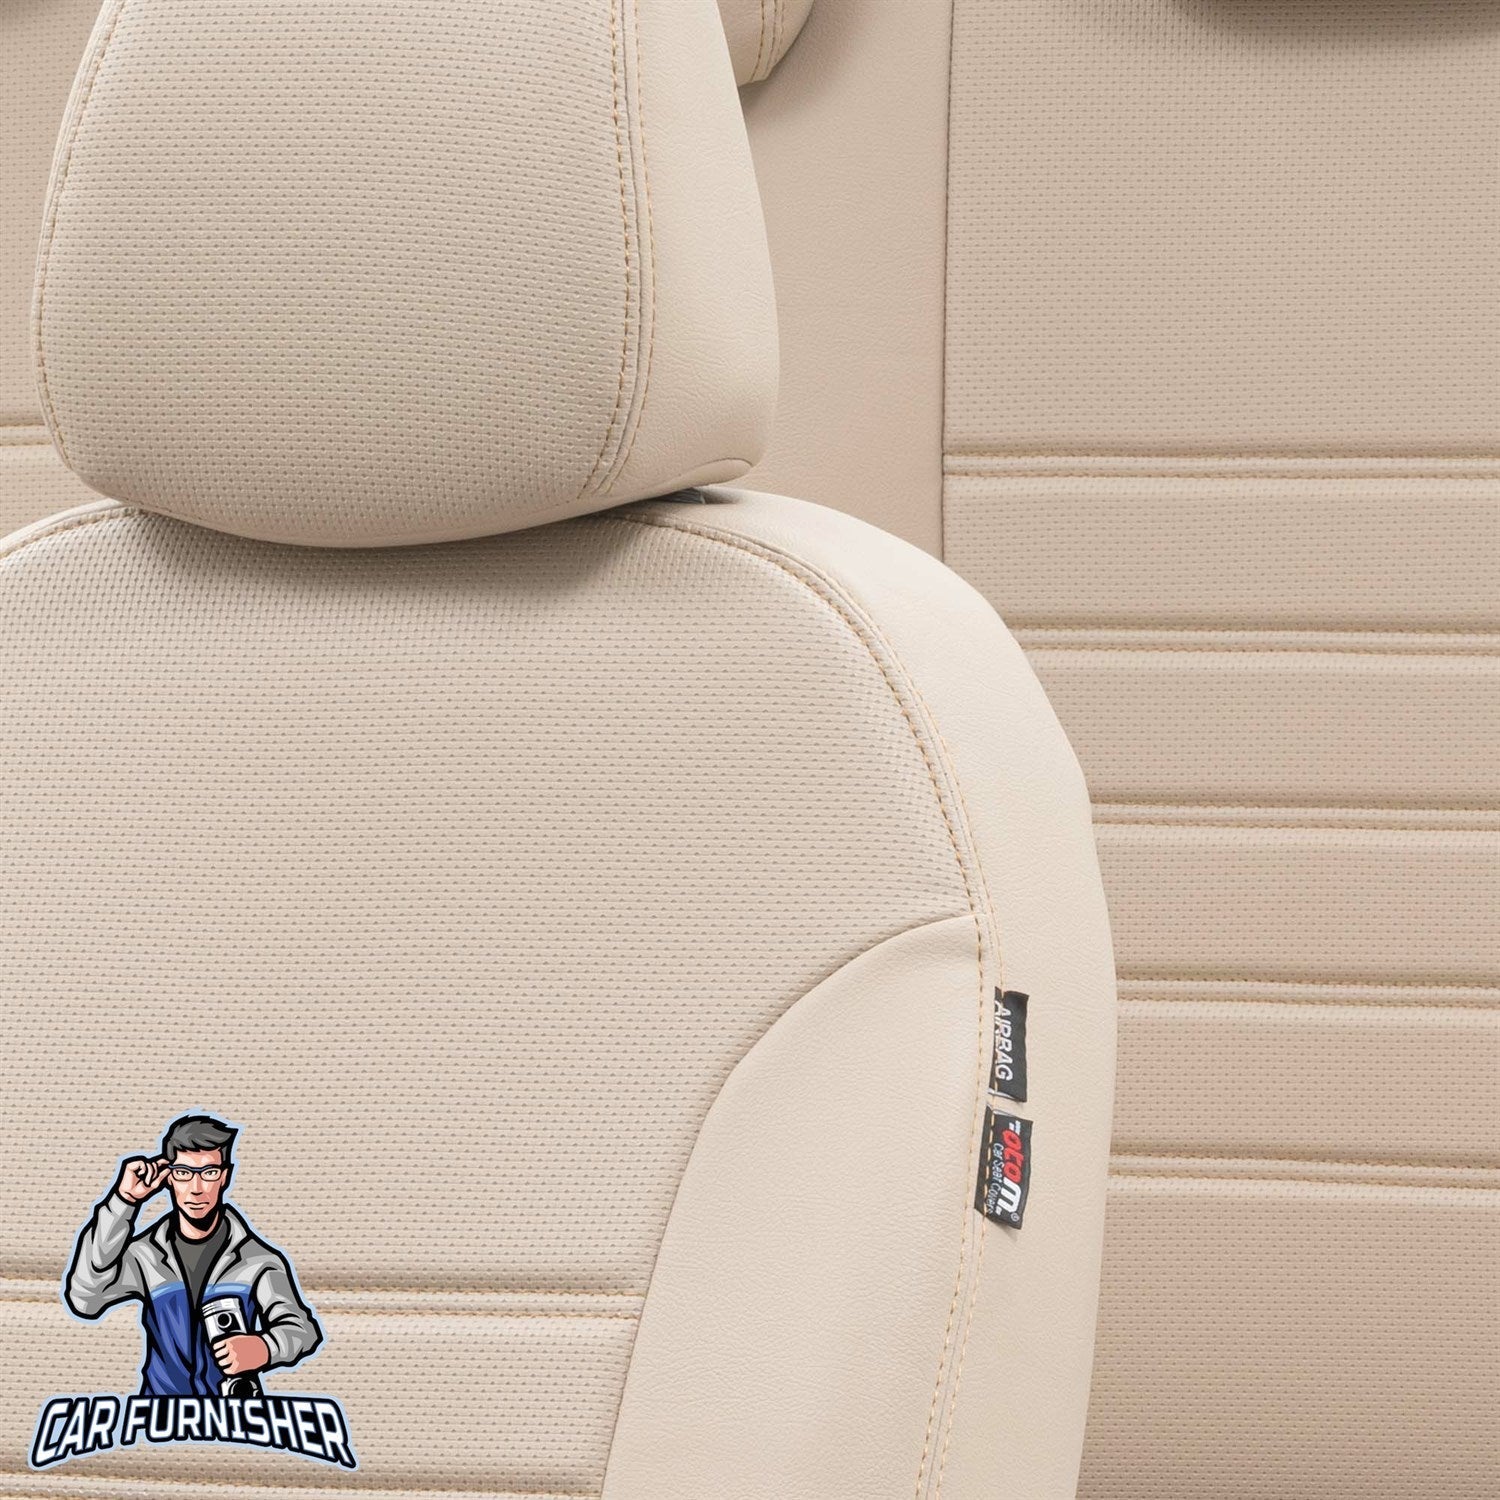 Bmw 5 Series Seat Cover New York Leather Design Beige Leather